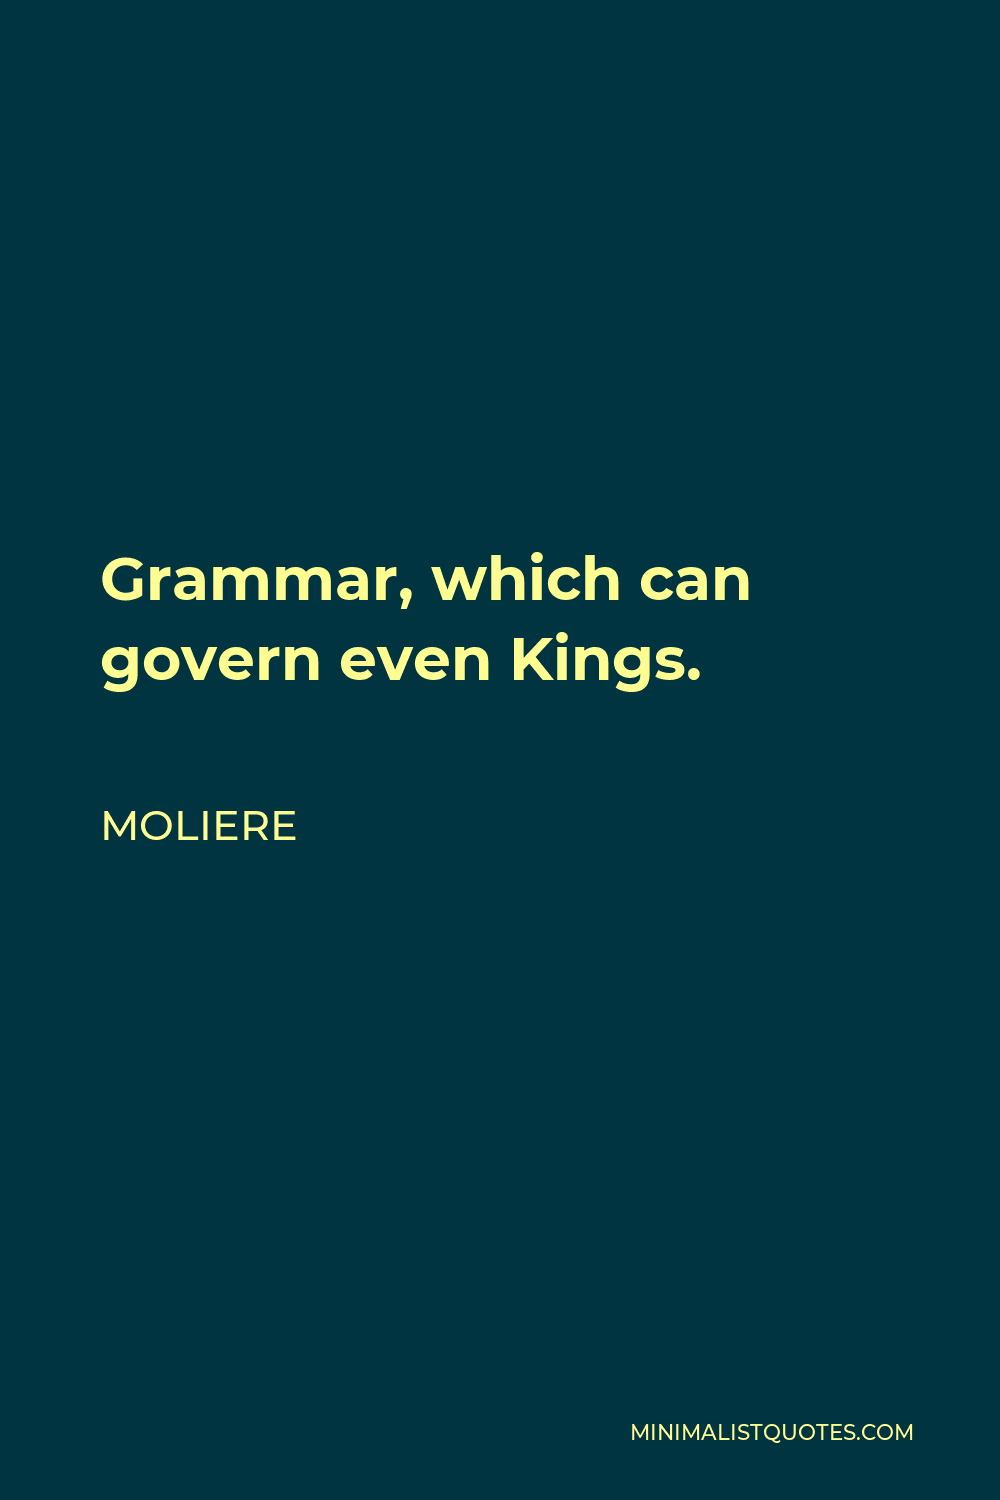 Moliere Quote - Grammar, which can govern even Kings.